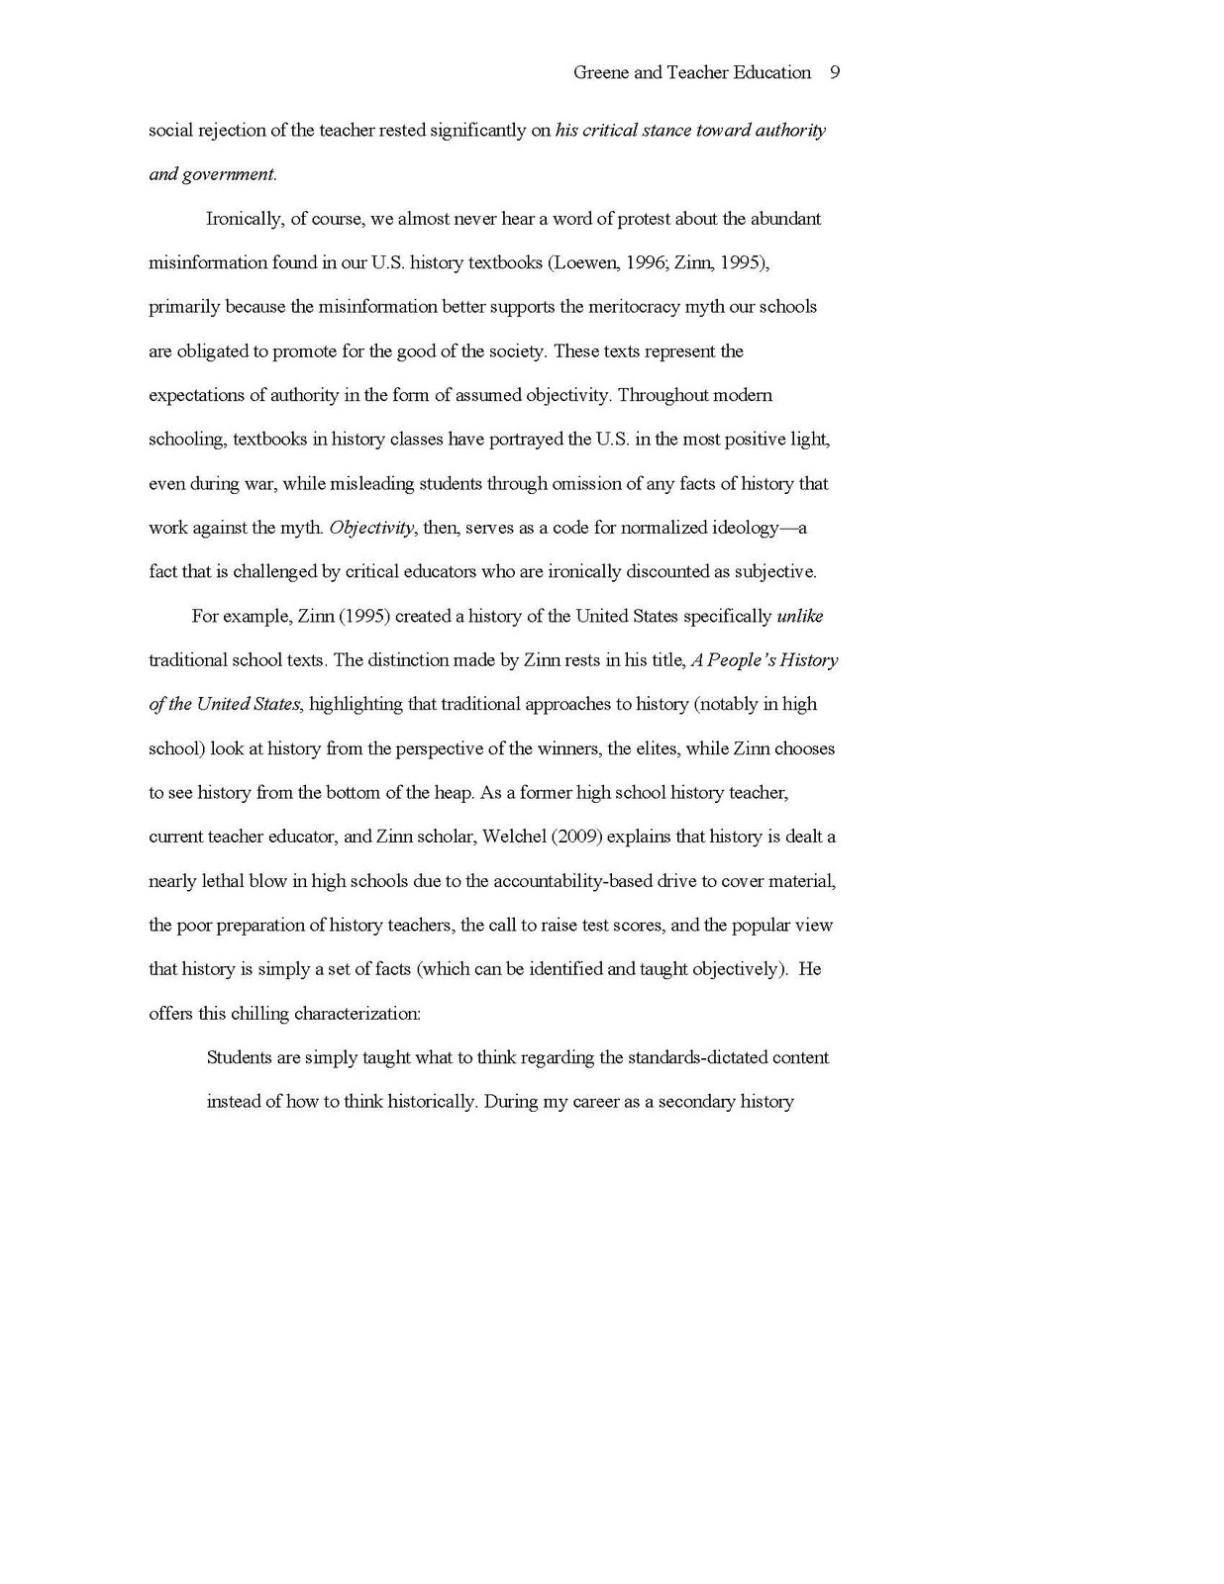 Download Apa Paper Template Word 2010 Free Software - Multimediautorrent Within Apa Research Paper Template Word 2010